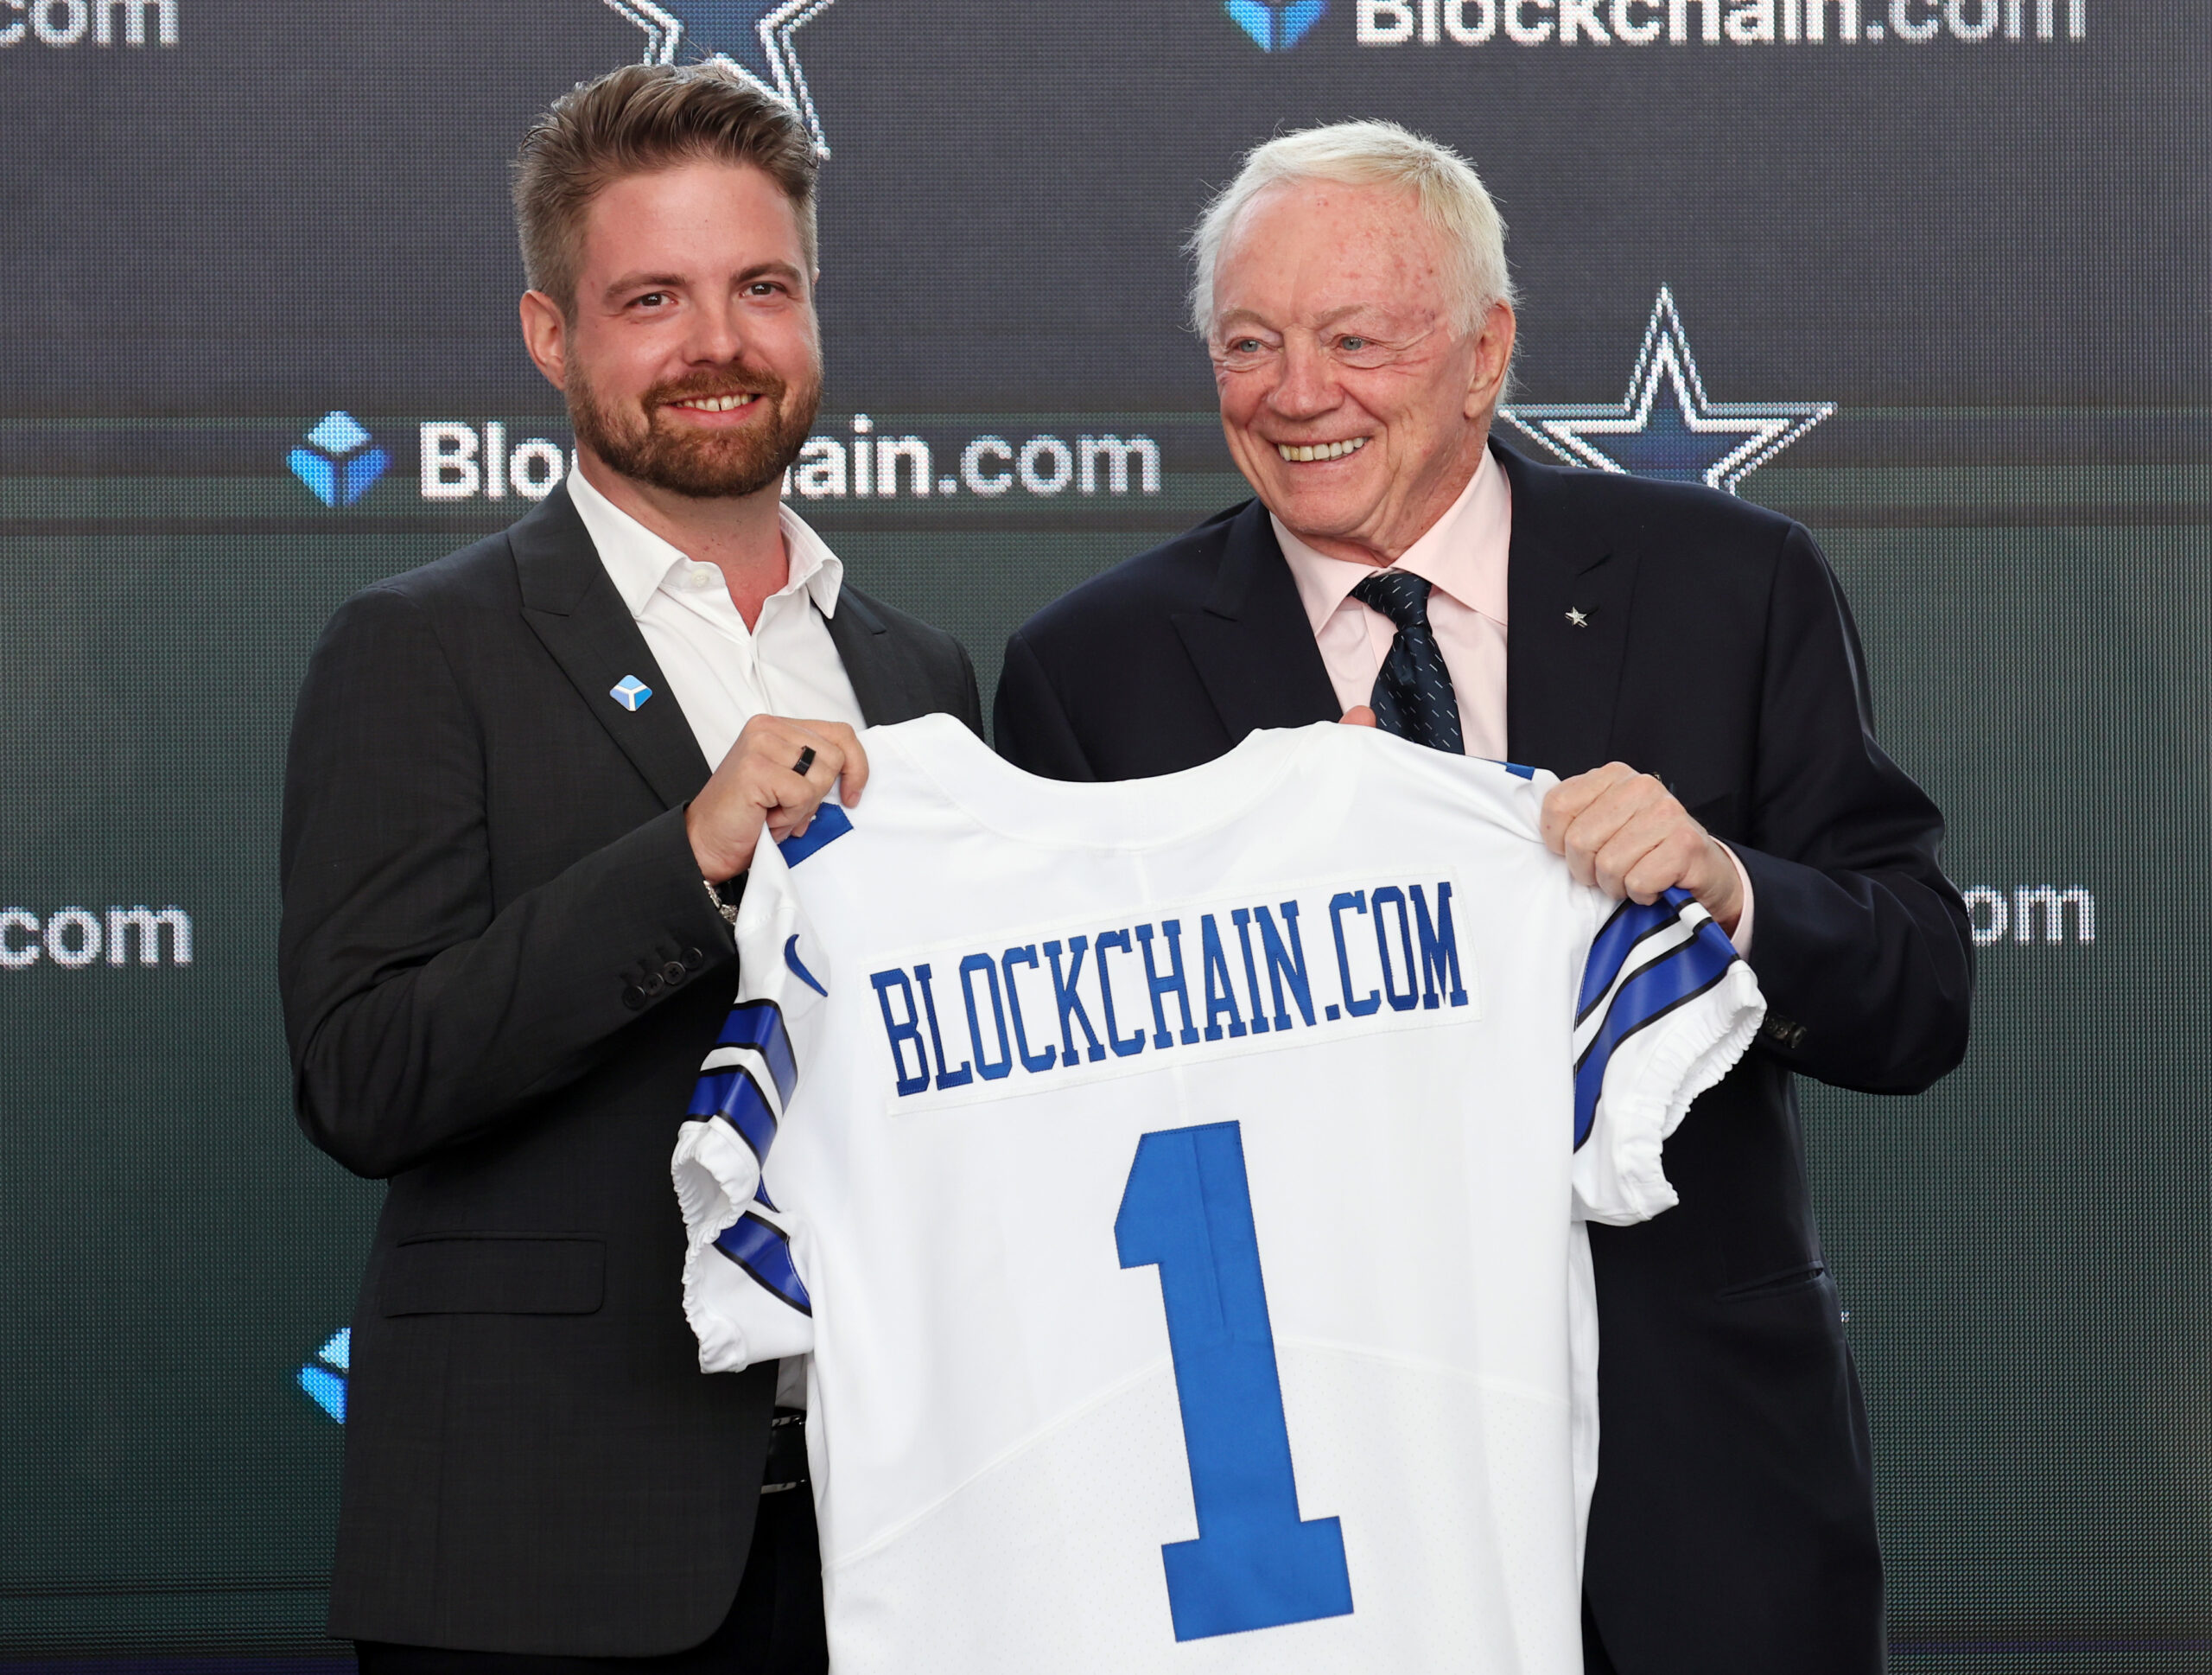 dallas-cowboys-strike-nfl-s-first-cryptocurrency-partnership